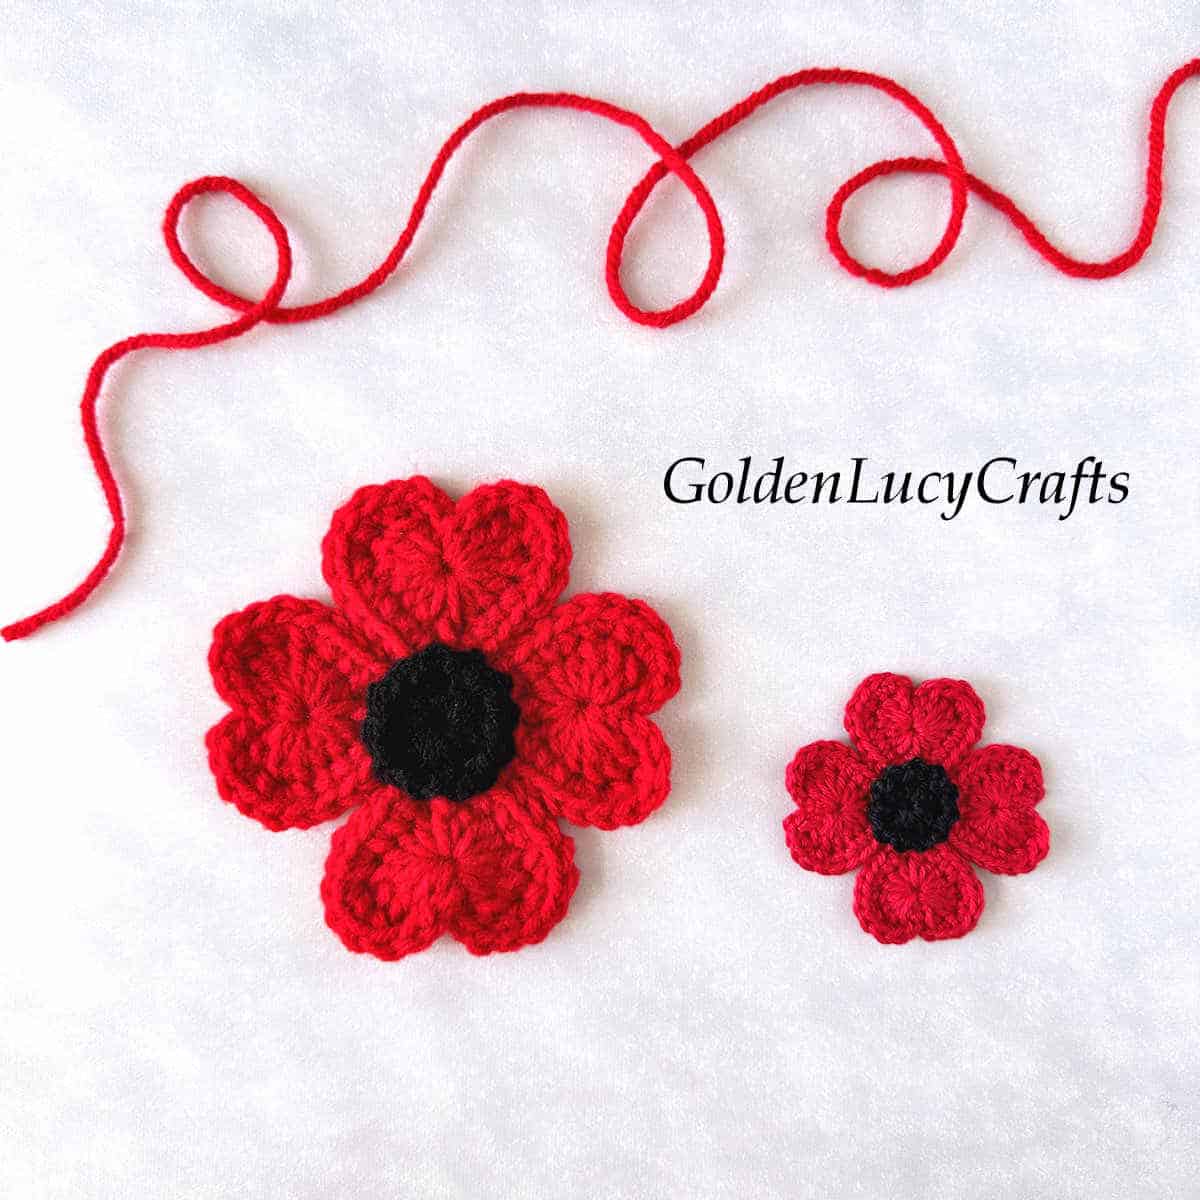 Large and small crocheted red poppy flowers.